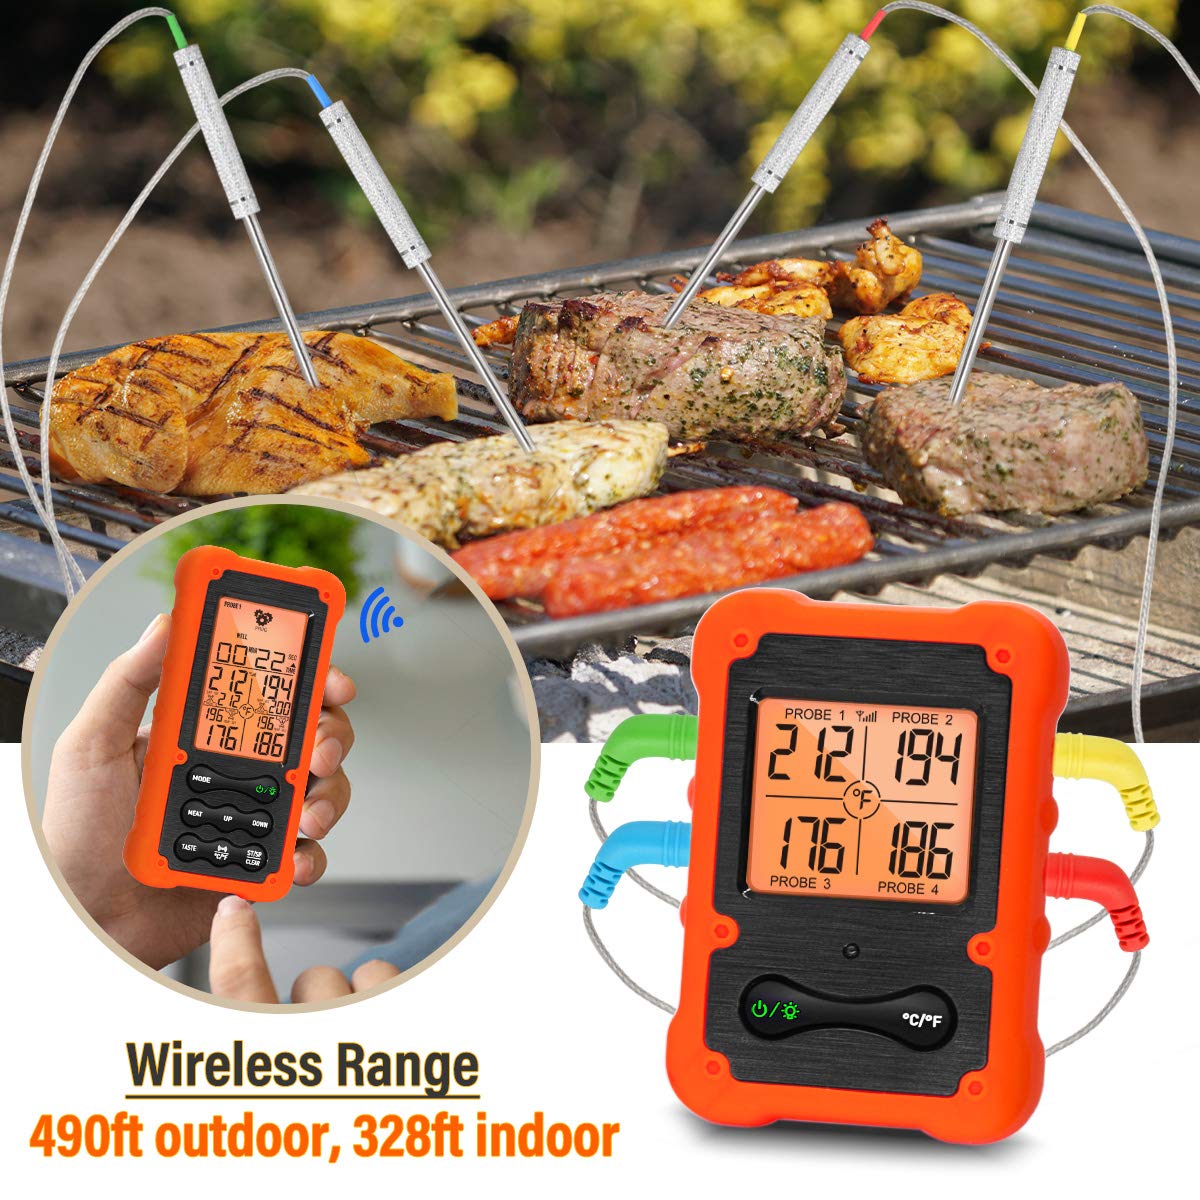 Grill Smoker BBQ Cooking Food Thermometer Oven Safe - Digital Wireless Meat Thermometer for Grilling Smoking with 4 Probes - Kitchen Deep Fry Oil Baking Liquids Steak Turkey Candy Thermometer